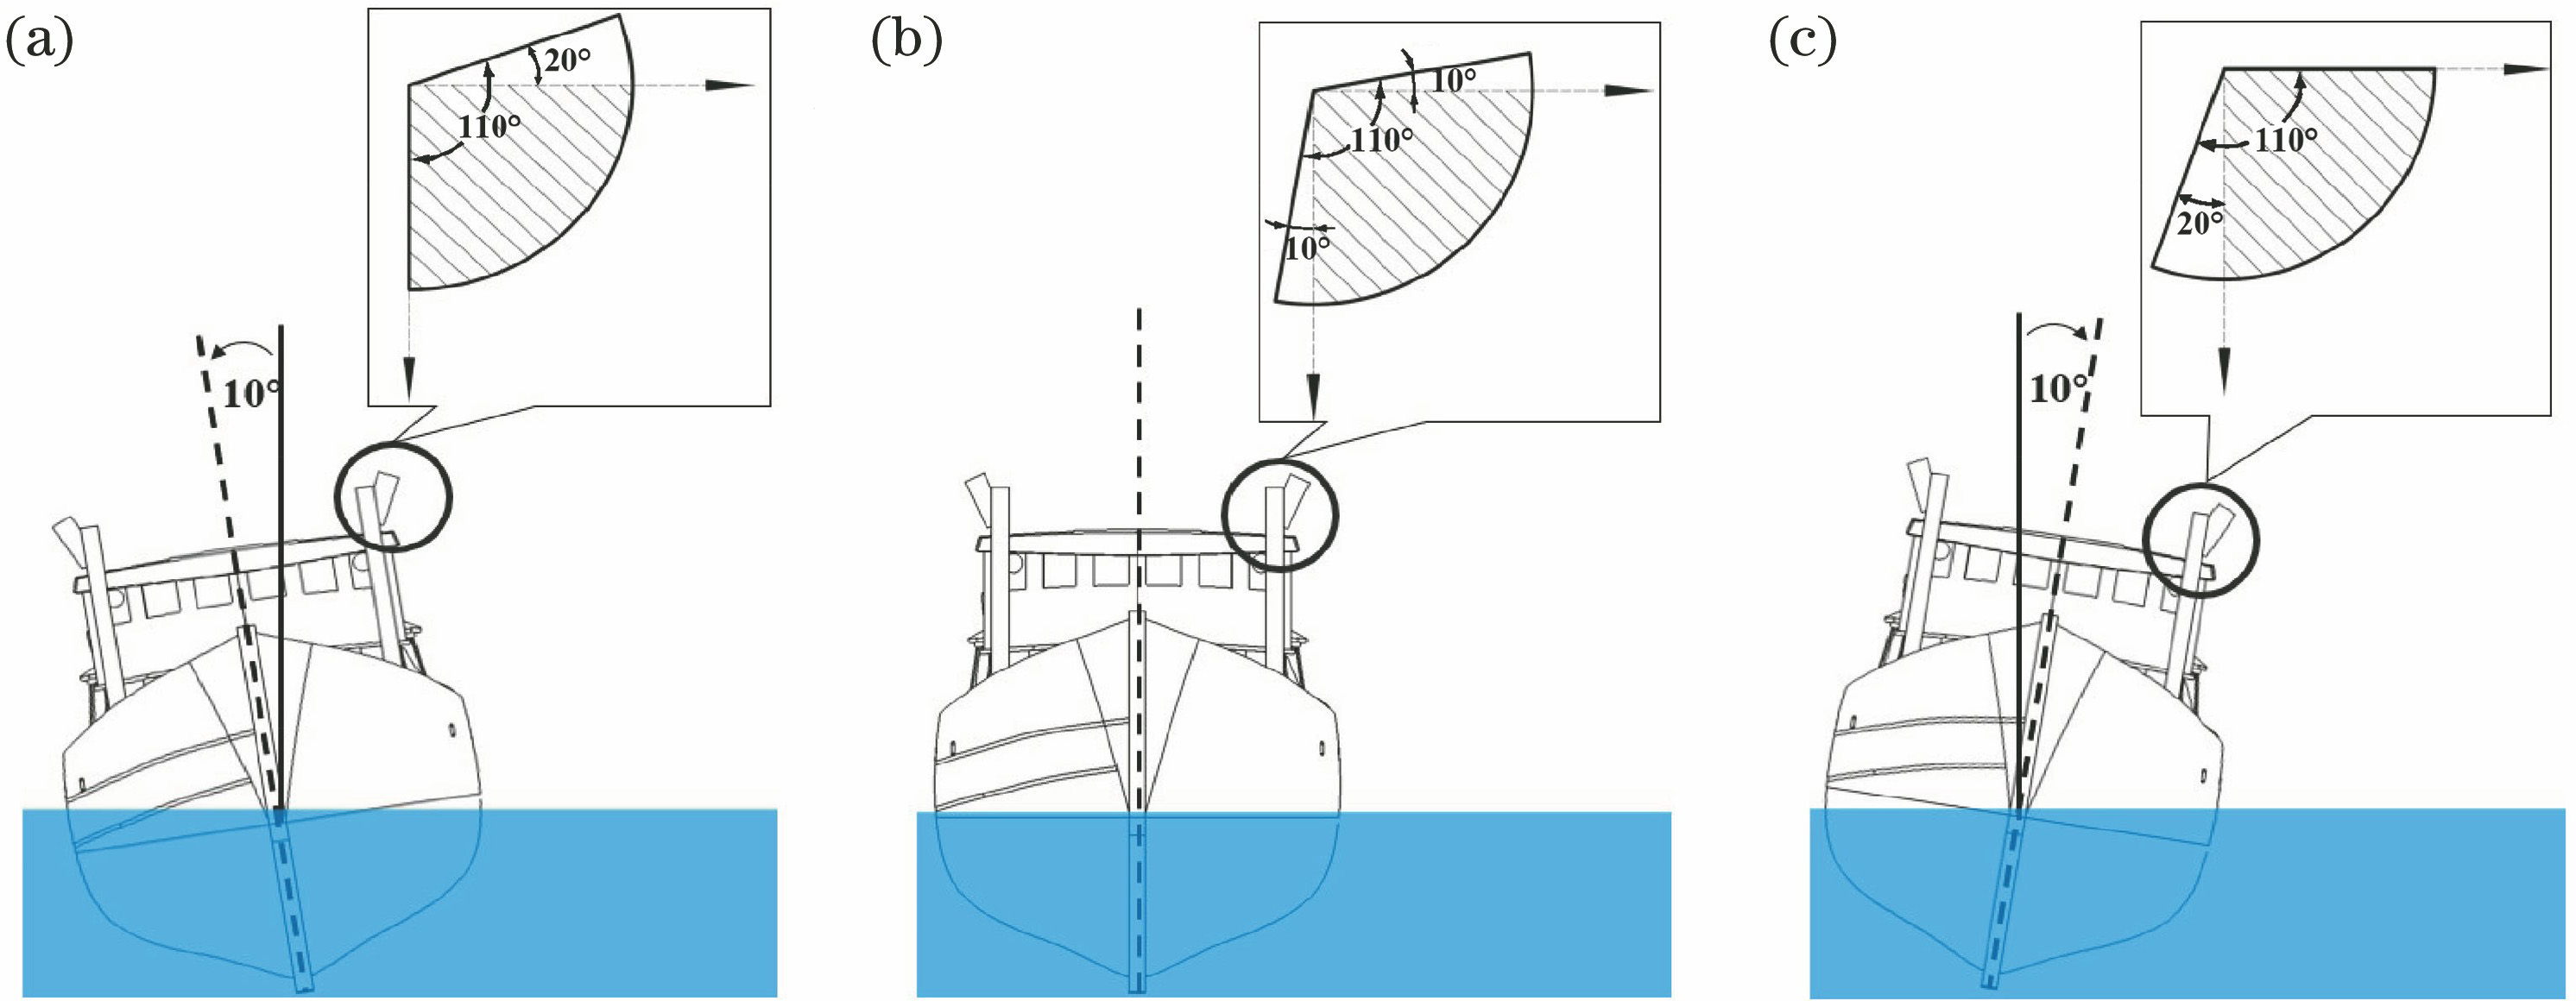 Relationship between the divergent angle of 110° and the effective irradiation angle of 90° of LED fishing lamp under different rolling angles. (a) Boat tilting to the left; (b) boat not rolling; (c) boat tilting to the right